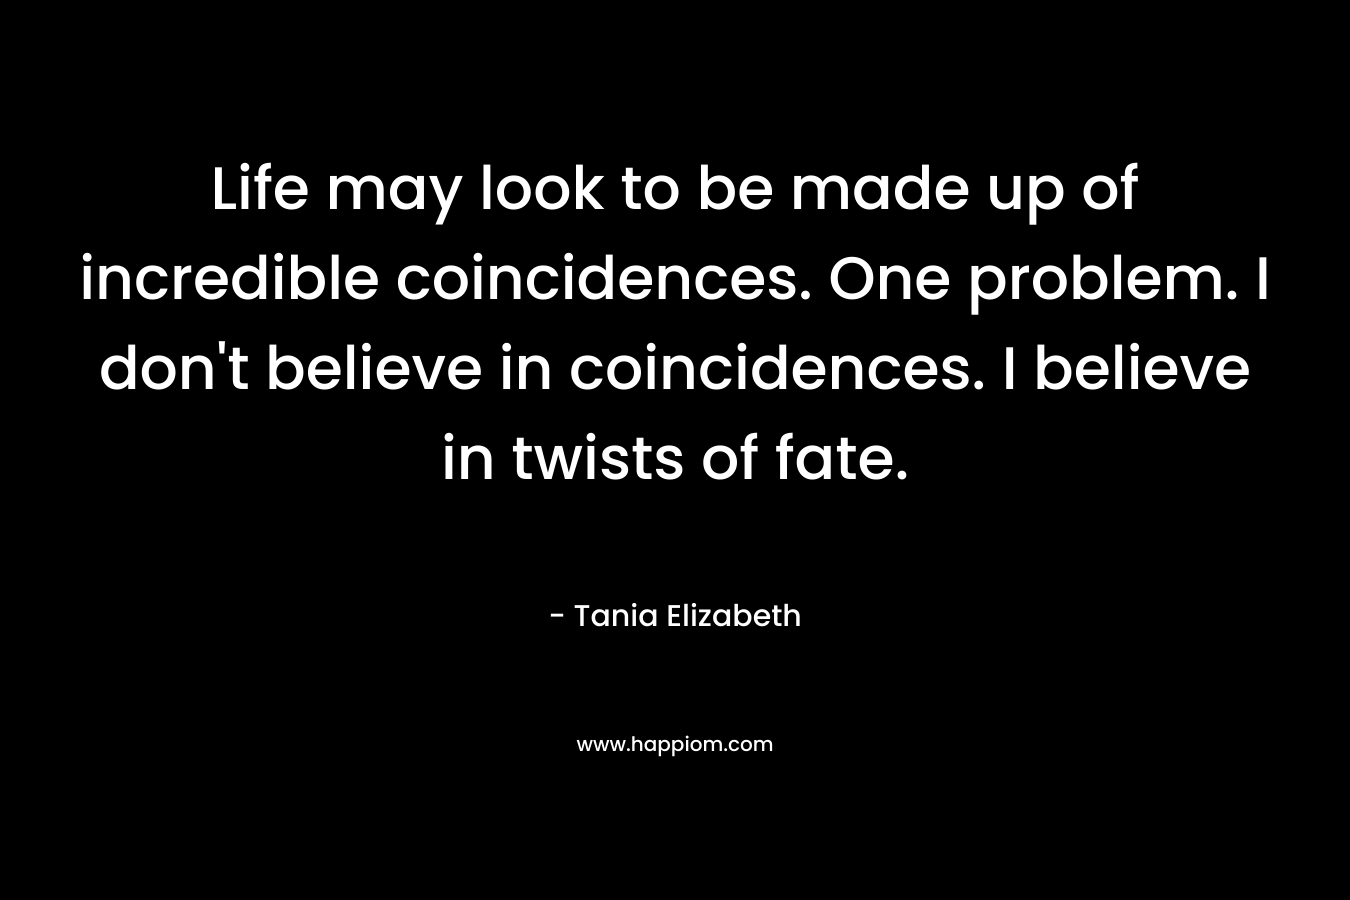 Life may look to be made up of incredible coincidences. One problem. I don’t believe in coincidences. I believe in twists of fate. – Tania Elizabeth